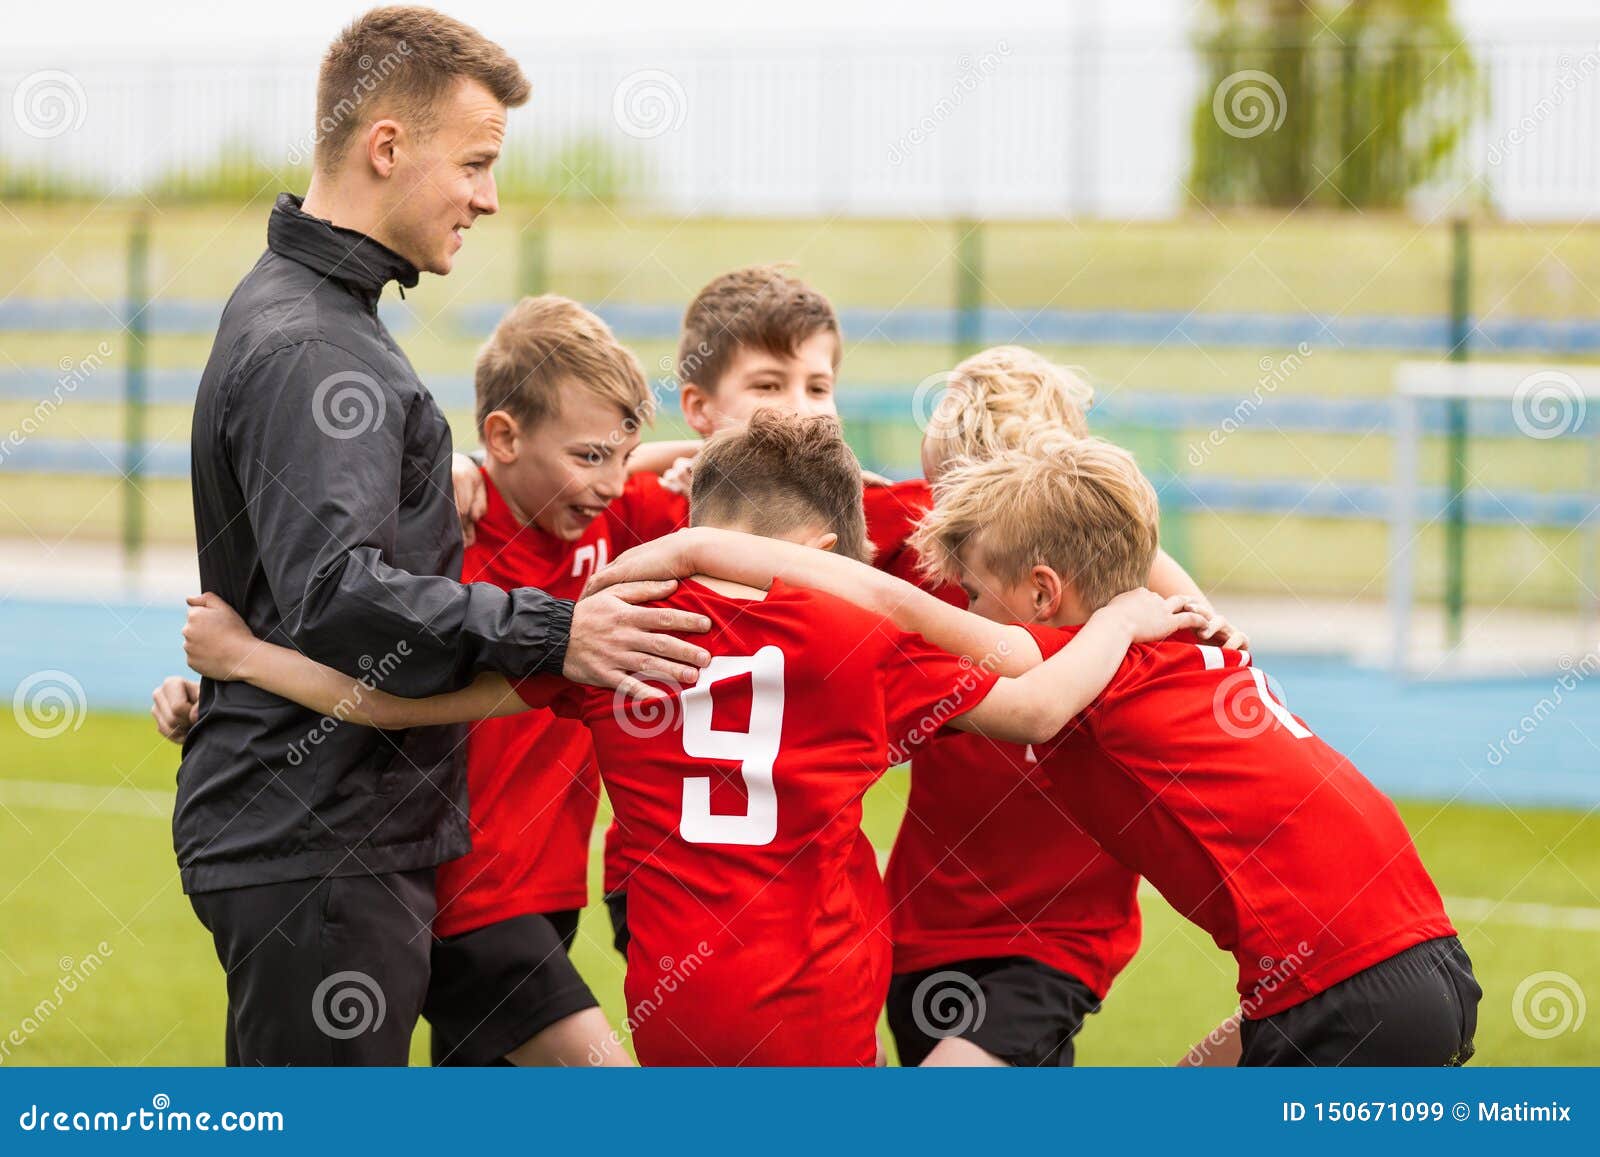 coaching youth sports. kids soccer football team huddle with coach